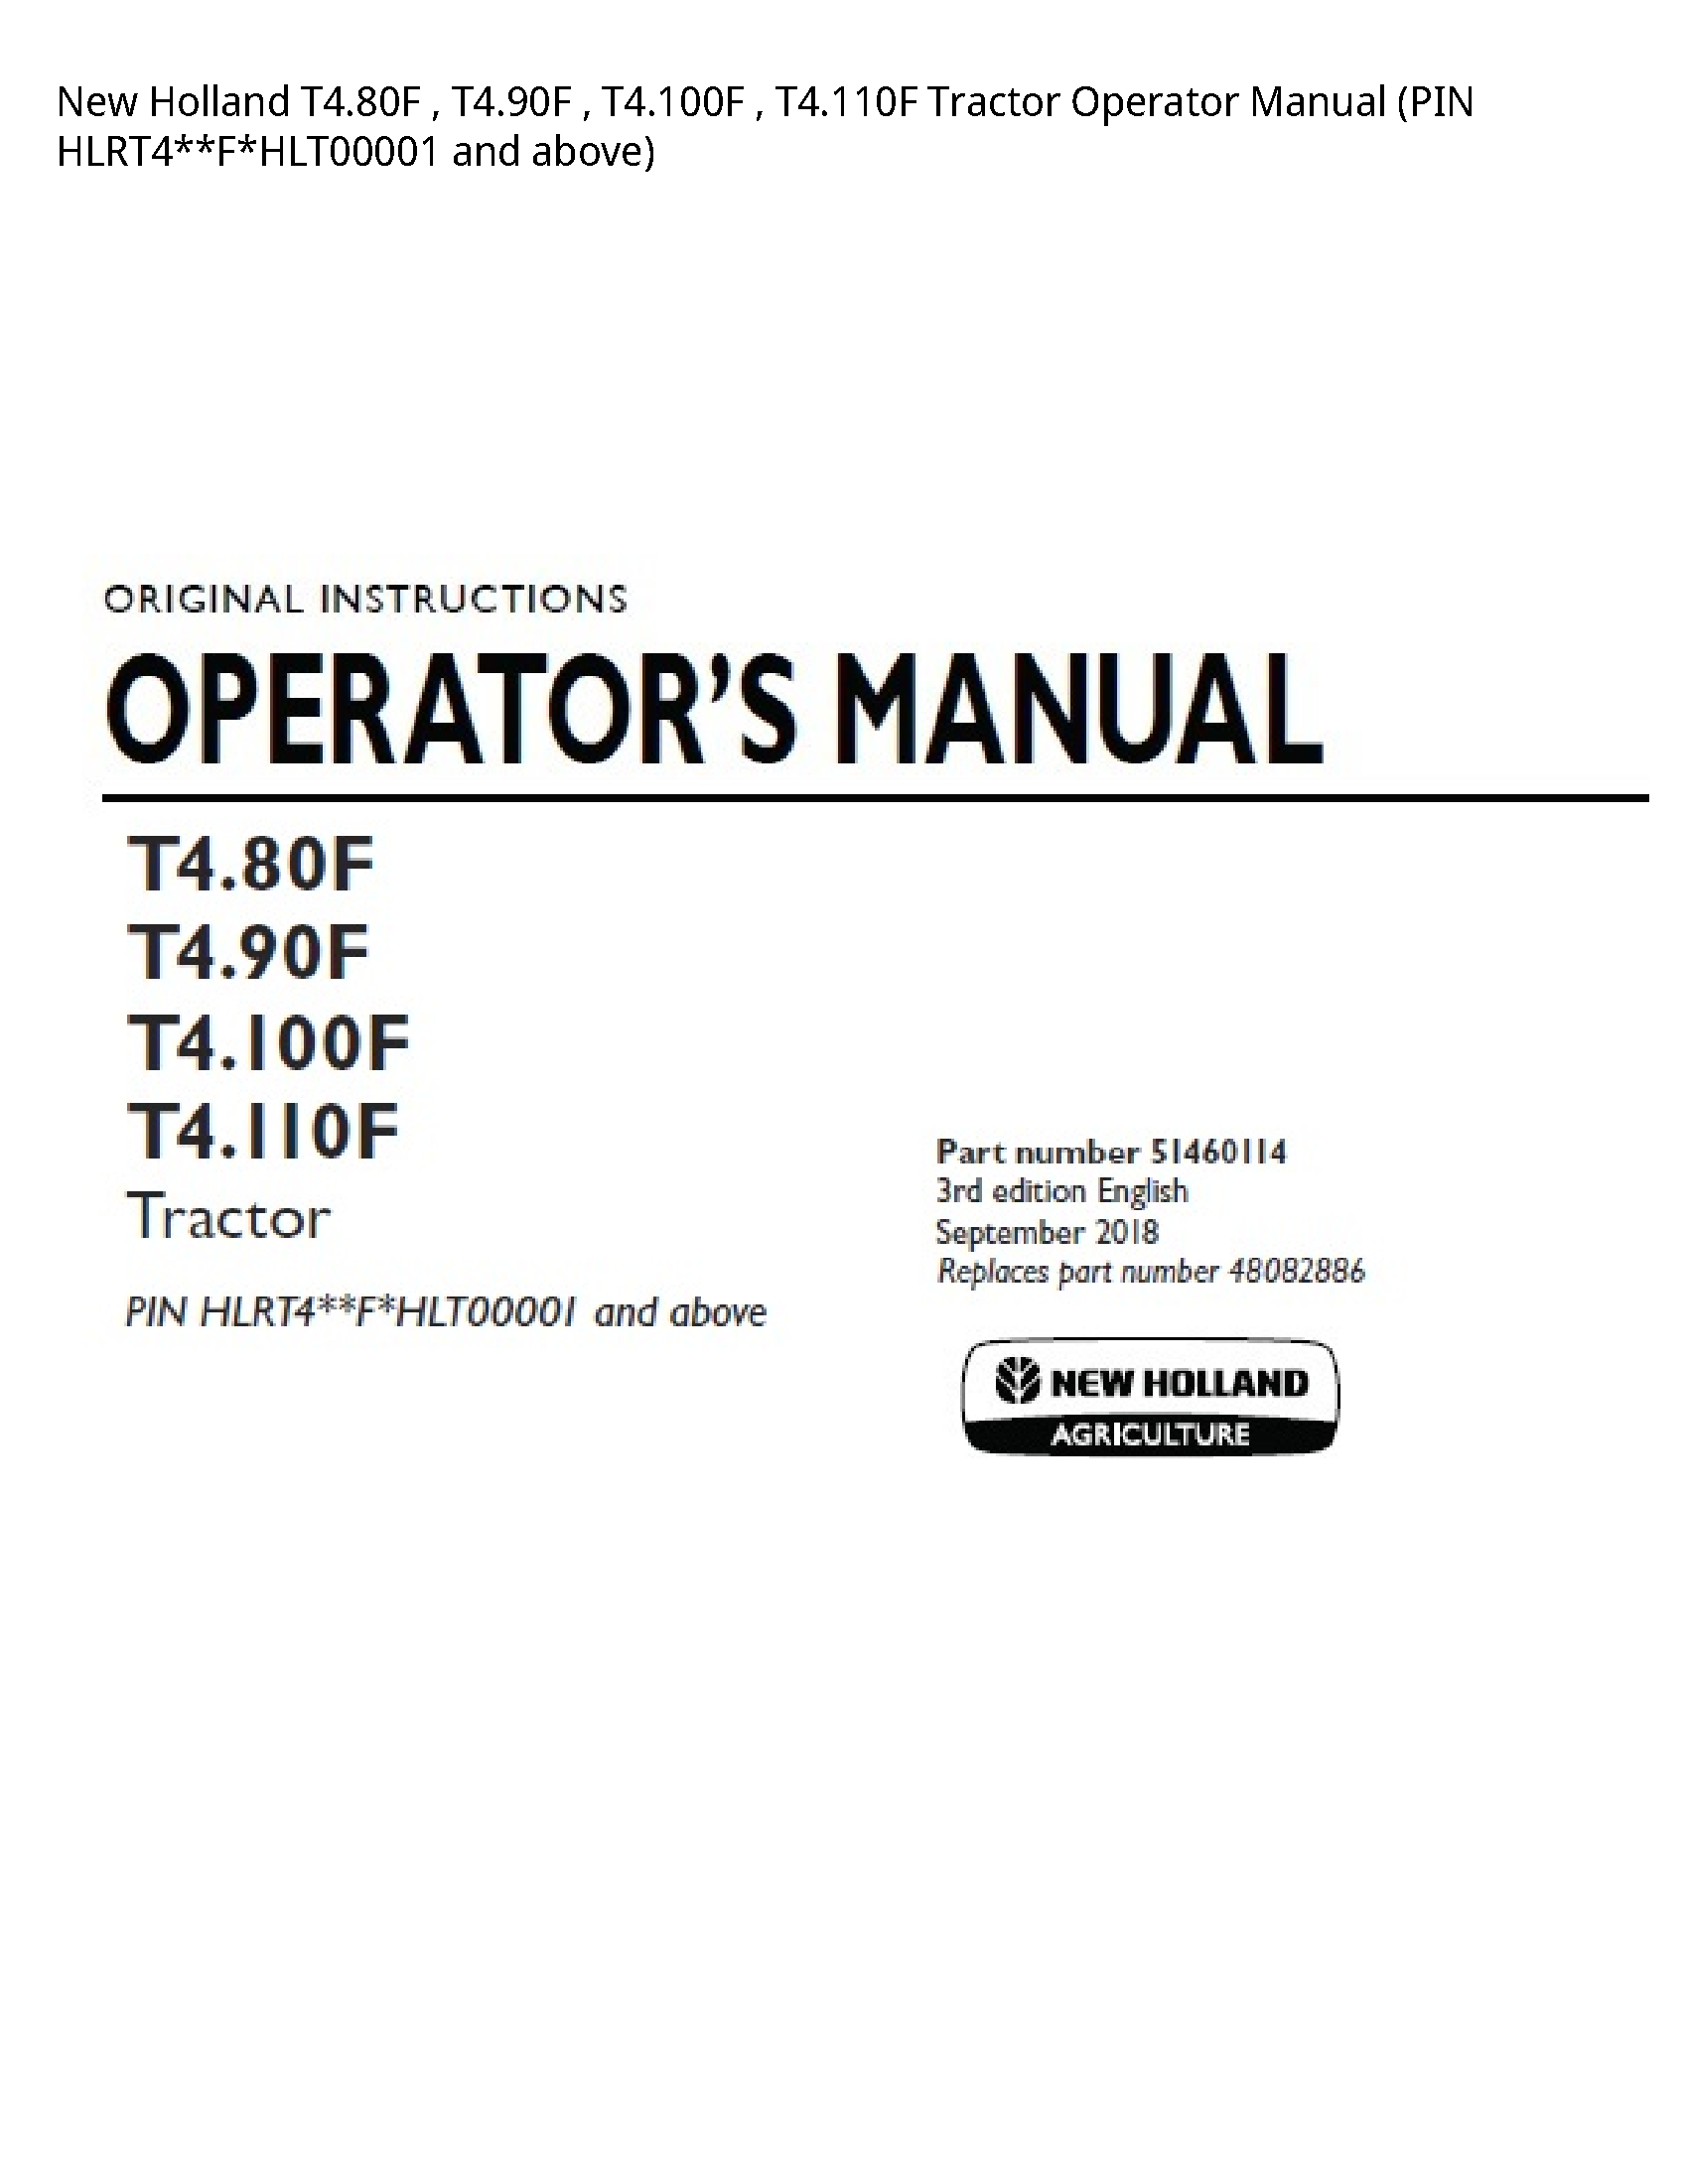 New Holland T4.80F Tractor Operator manual